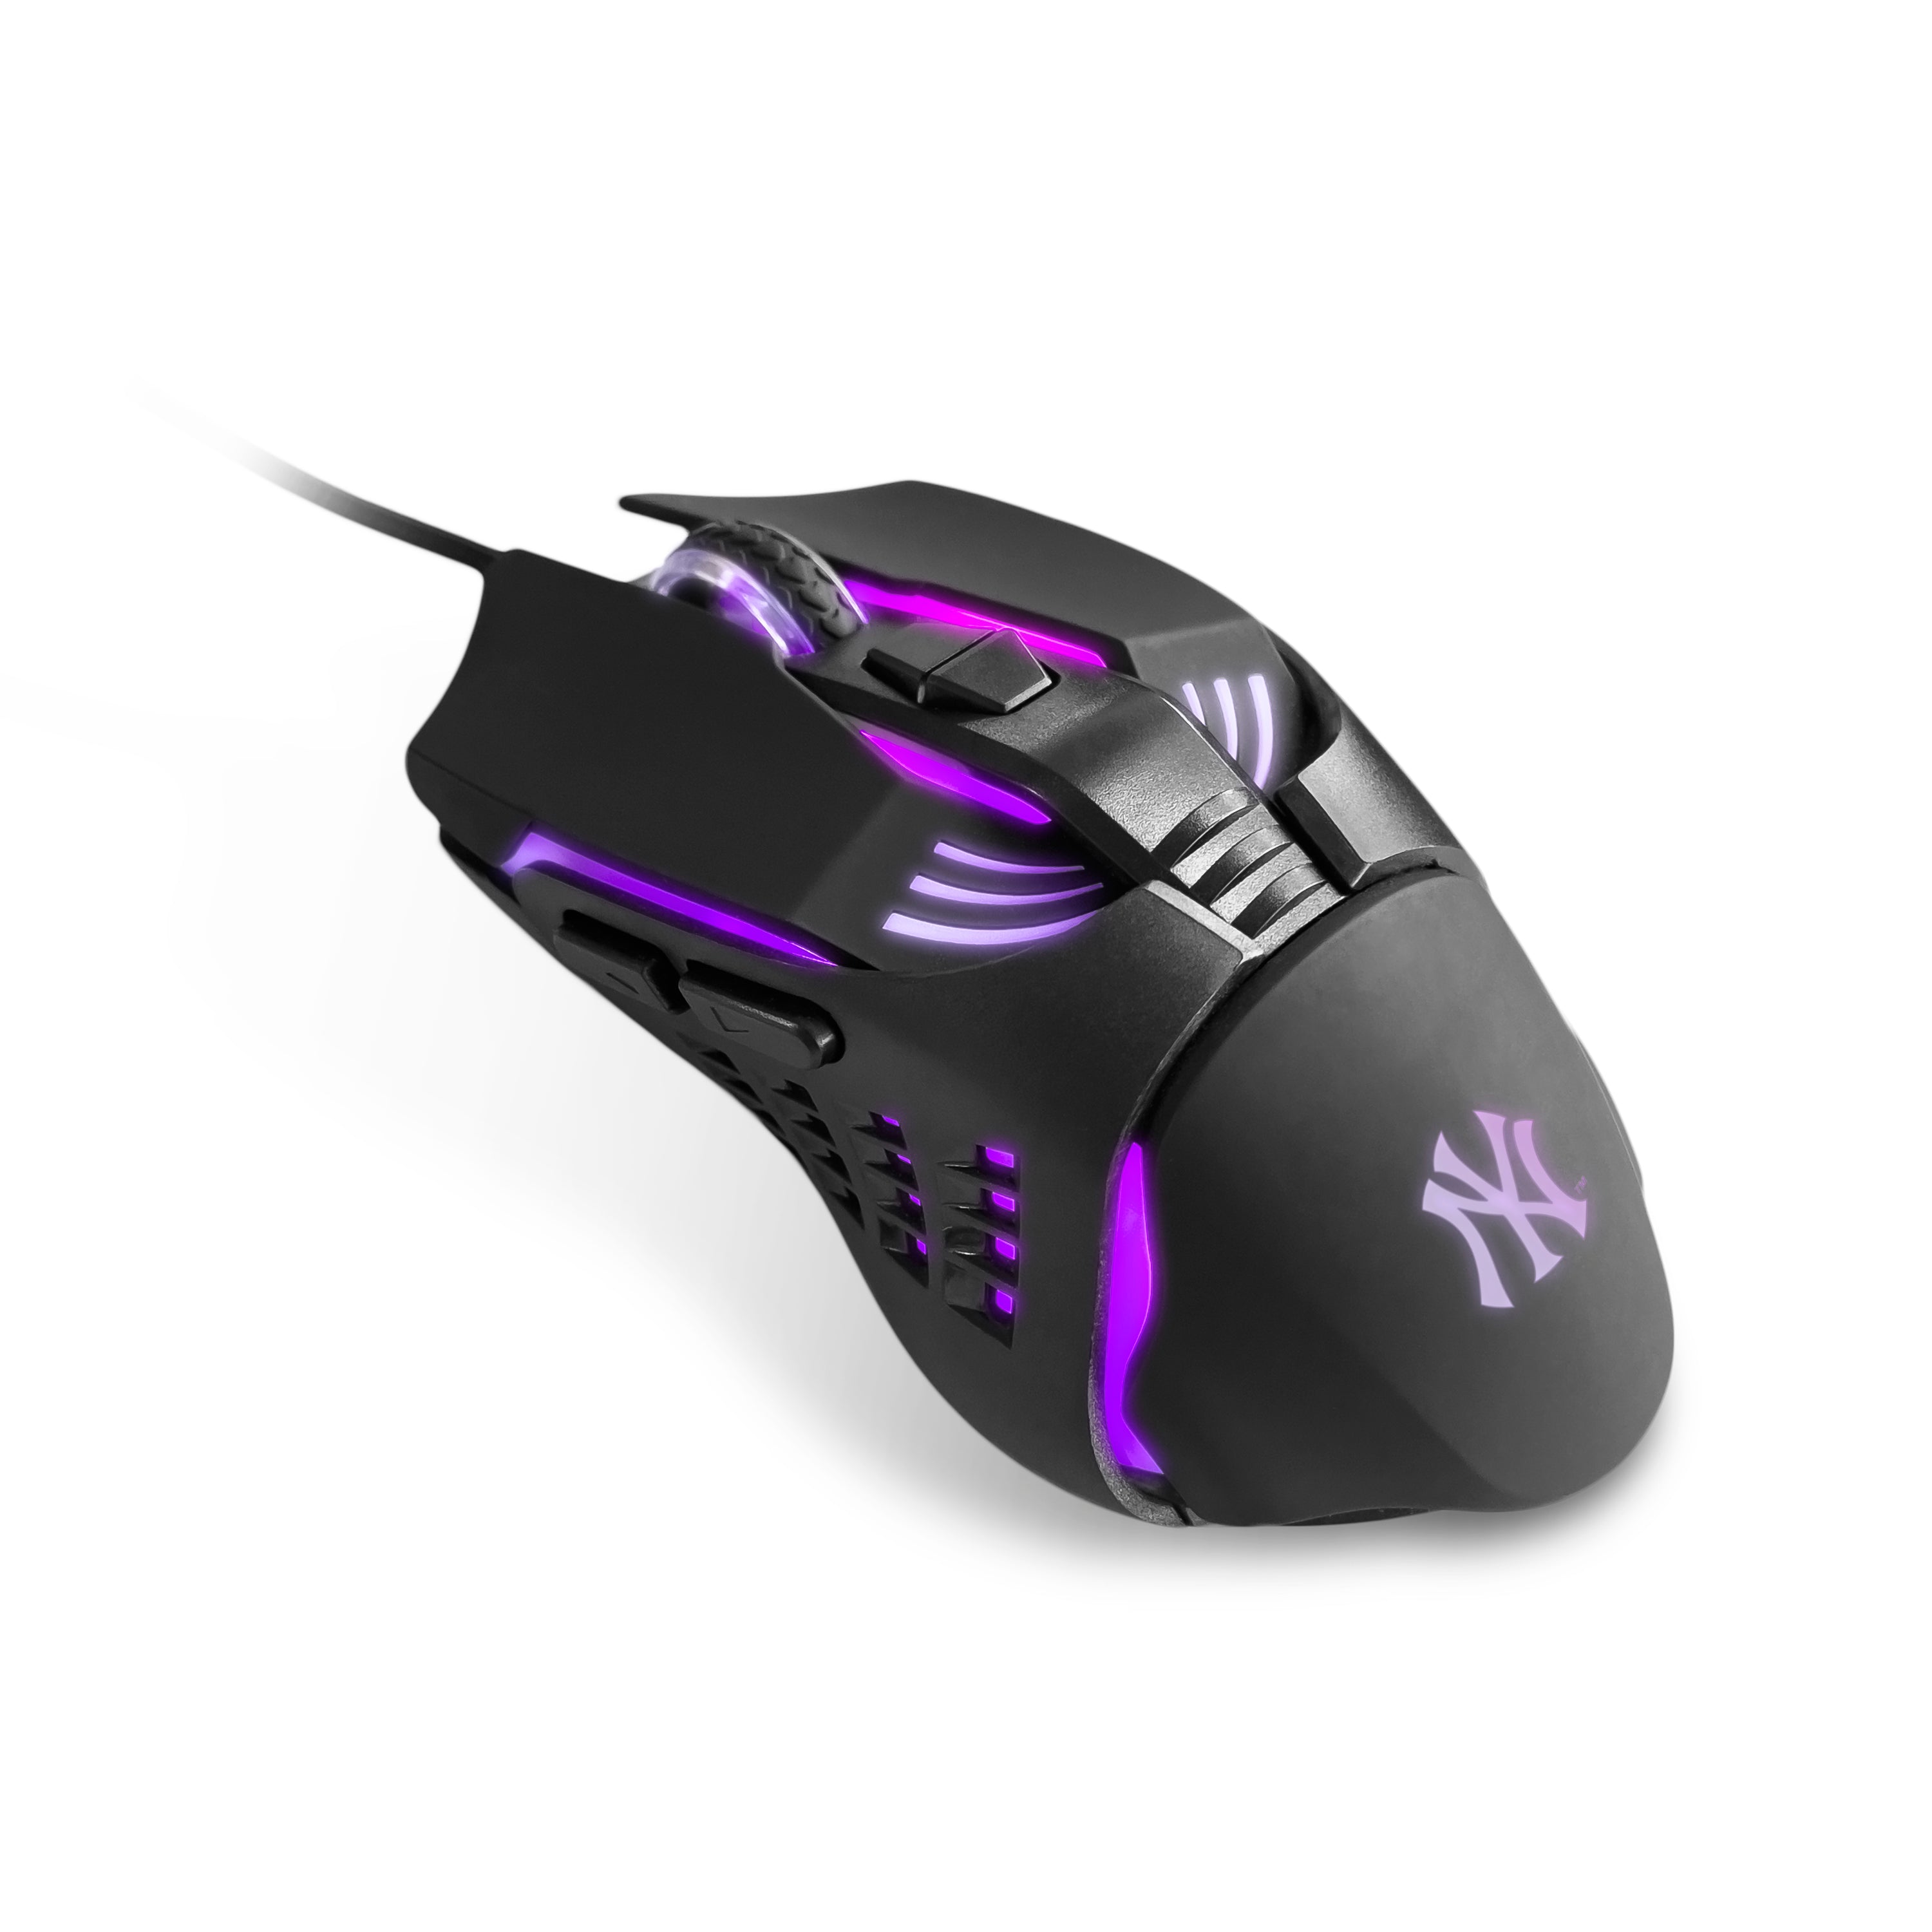 MLB Wired LED Gaming Mouse